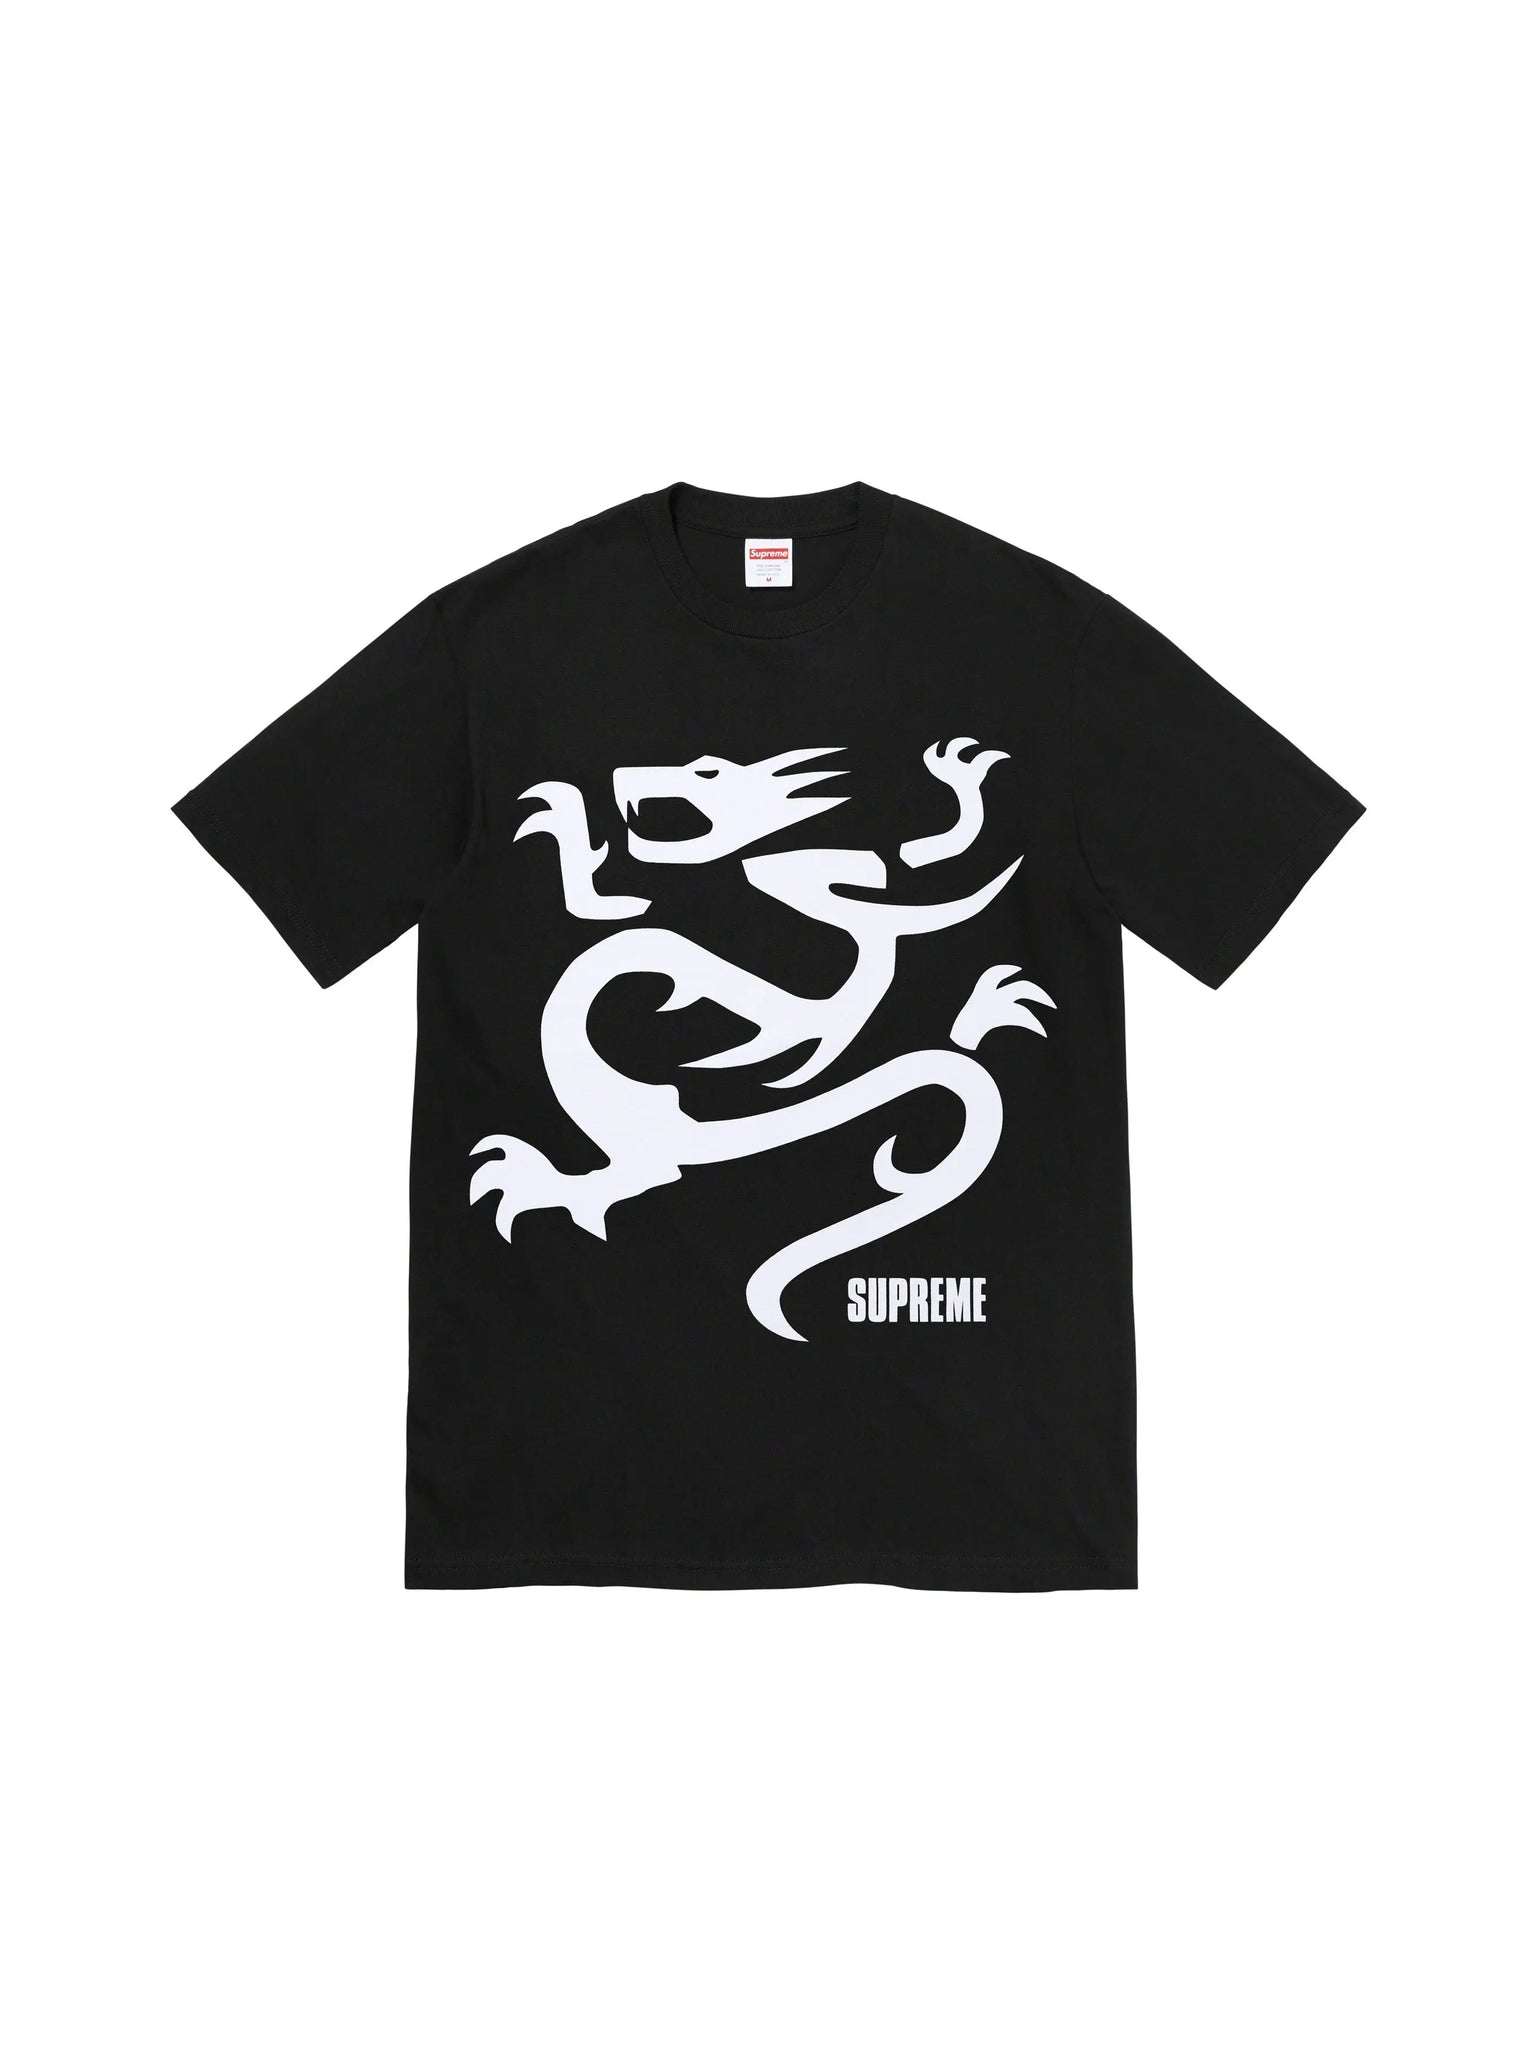 Supreme Mobb Deep Dragon Tee Black in Auckland, New Zealand - Shop name